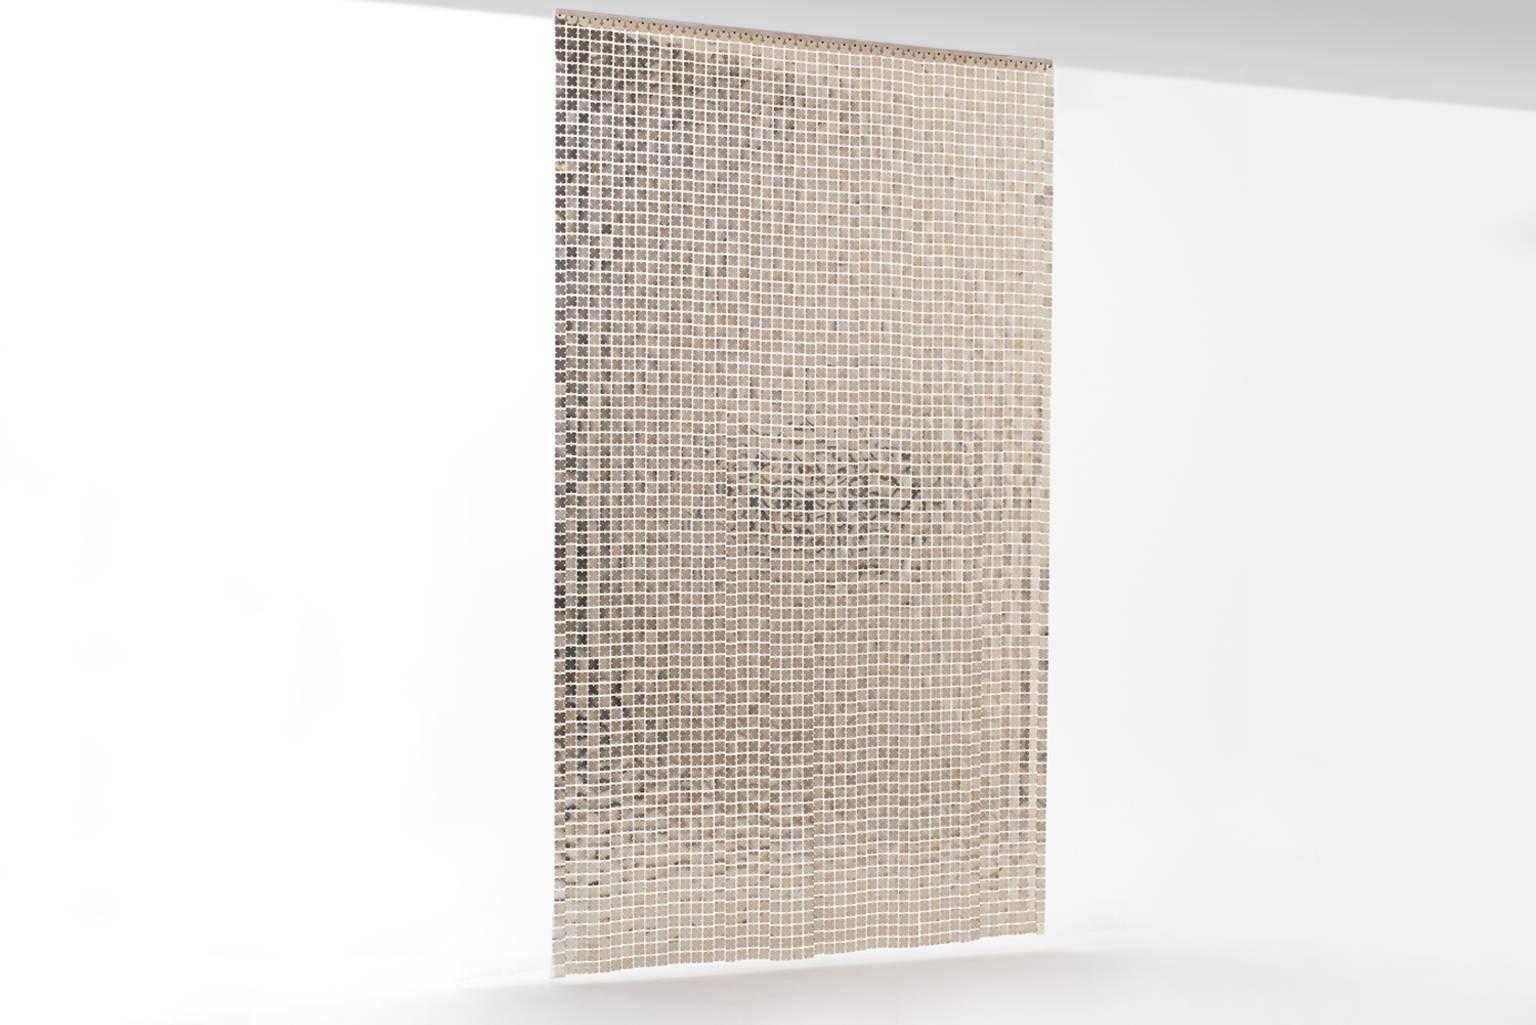 Distinctive chrome Space Curtain by Paco Rabanne for Softwear Baumann AG, circa 1970. The curtain is comprised of plasticized metal squares (the same he used in his iconic mini dresses) joined by small chrome rings. The chrome metal squares have